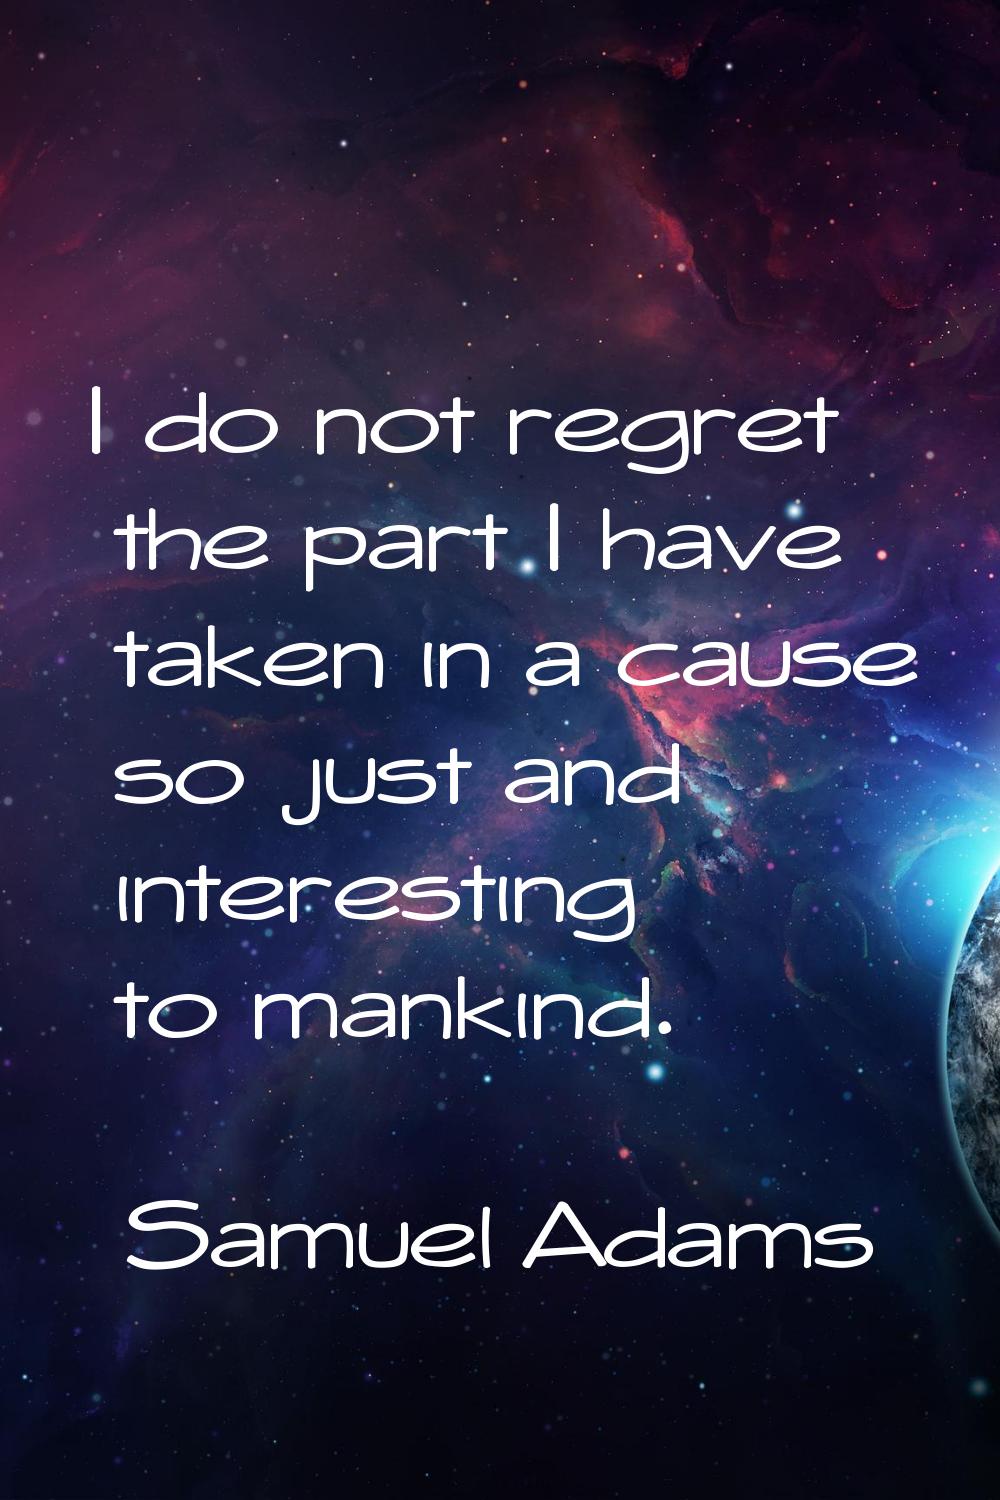 I do not regret the part I have taken in a cause so just and interesting to mankind.